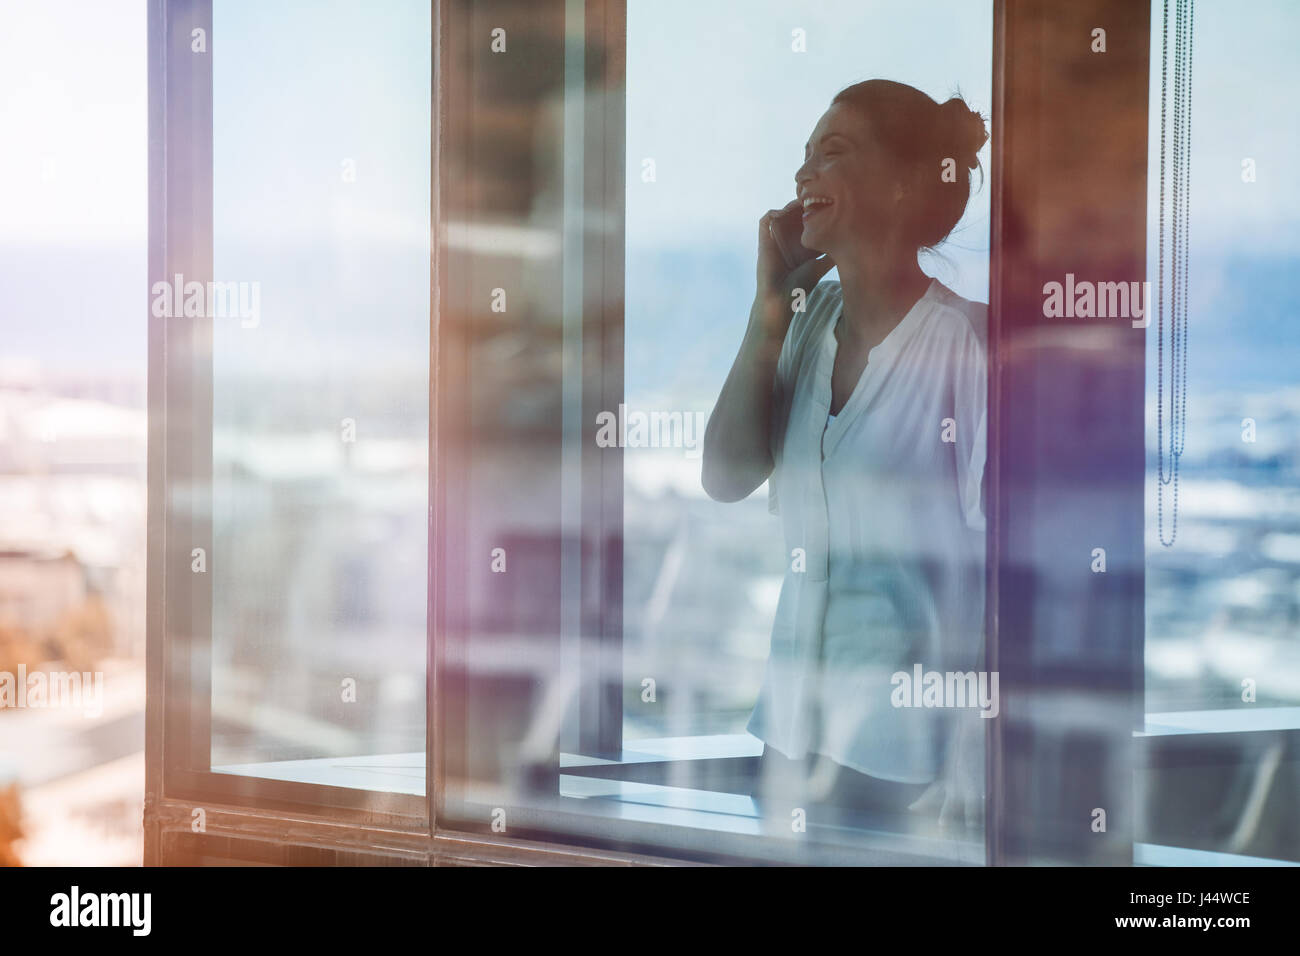 Smiling mature businesswoman standing inside office building and talking on cell phone. Female executive standing by glass window using mobile phone. Stock Photo